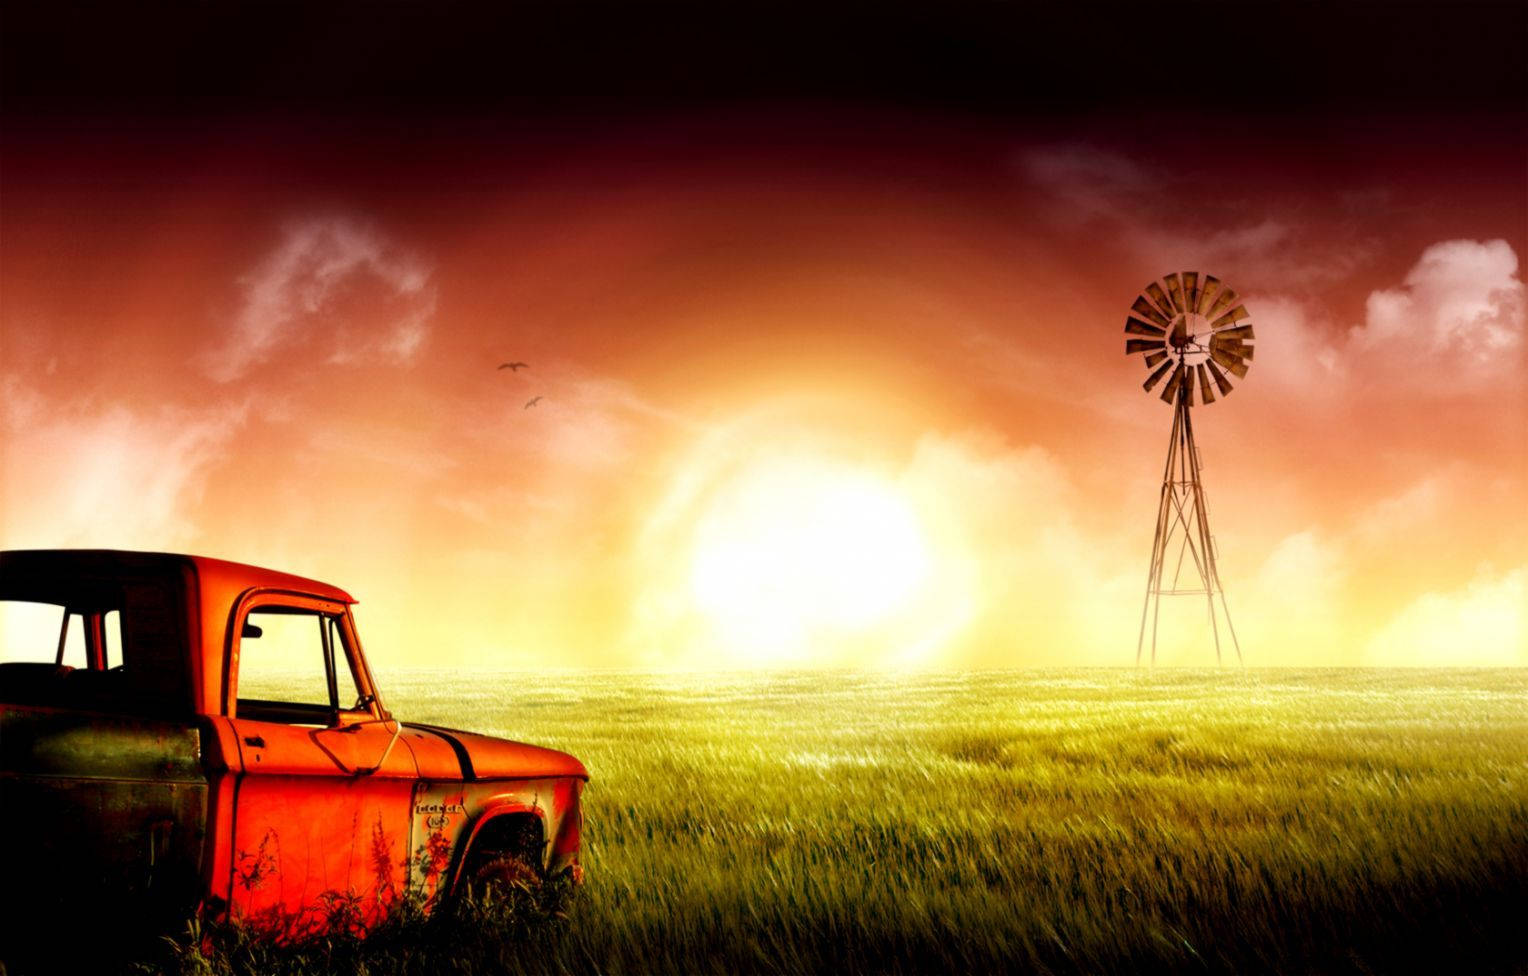 "Meditative peace of a distant farm at sunset" Wallpaper